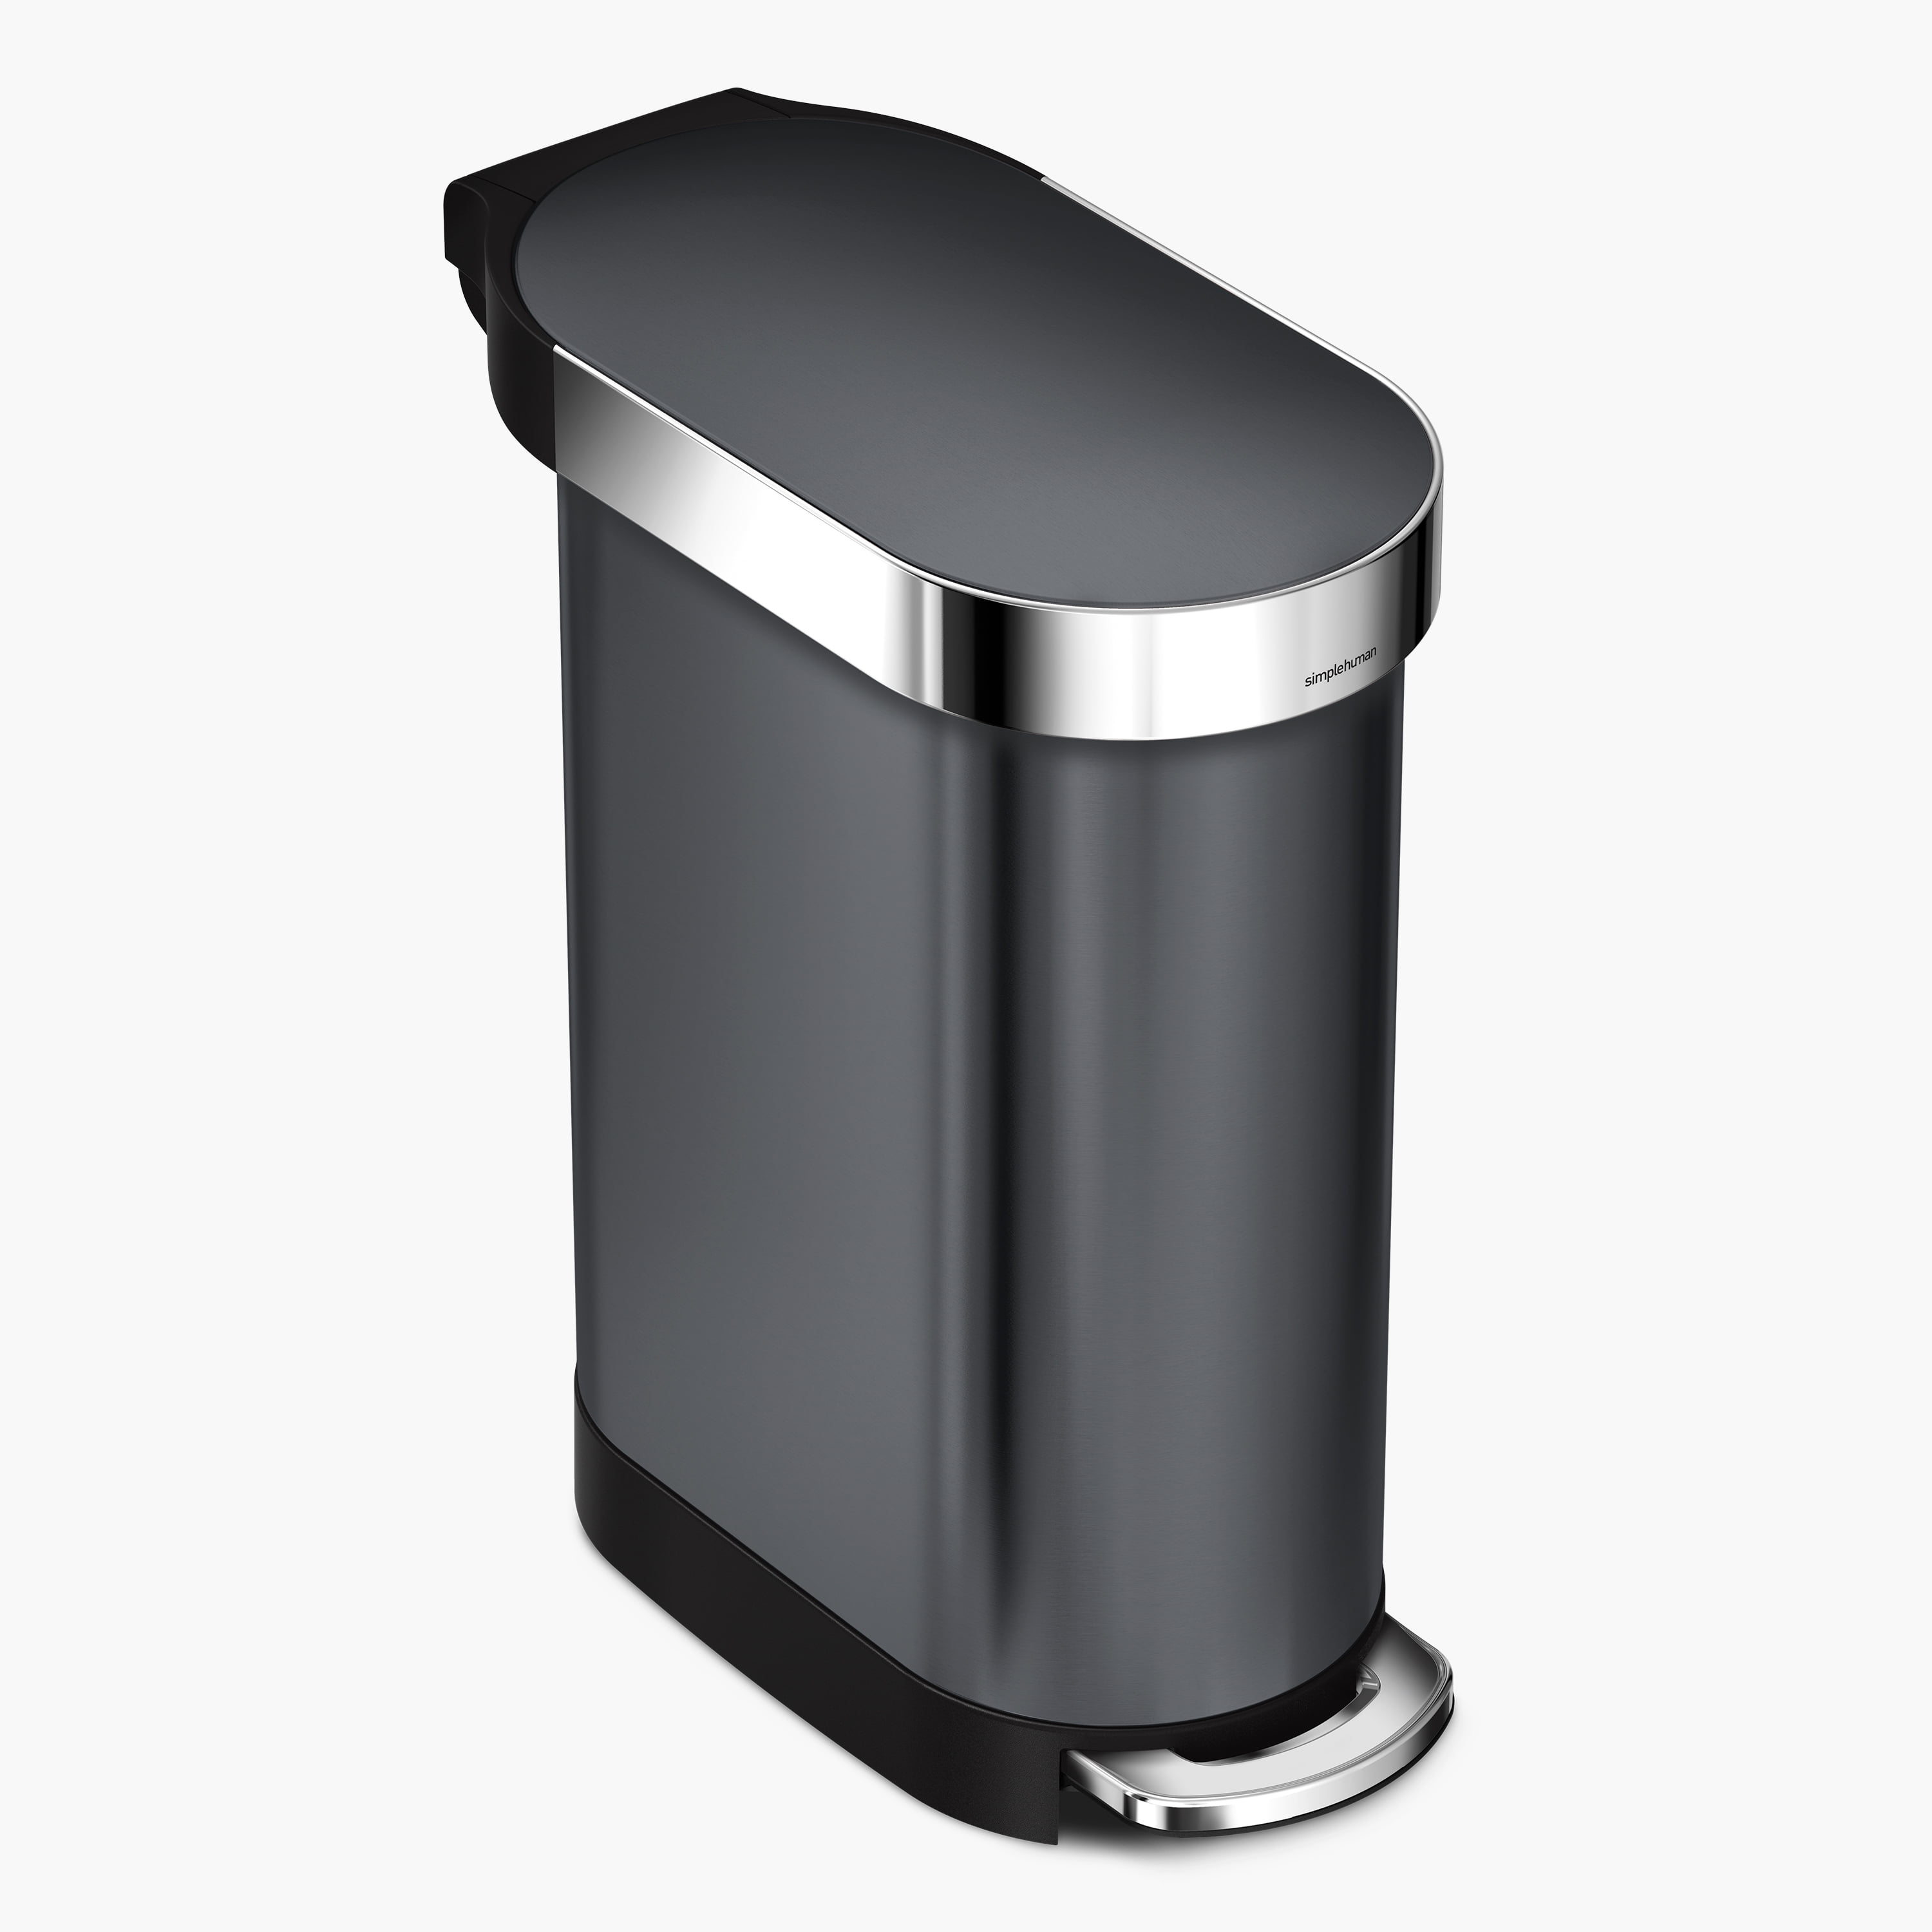 simplehuman 45 Liter / 12 Gallon Slim Hands-Free Kitchen Step Trash Can Simplehuman Stainless Steel Trash Can